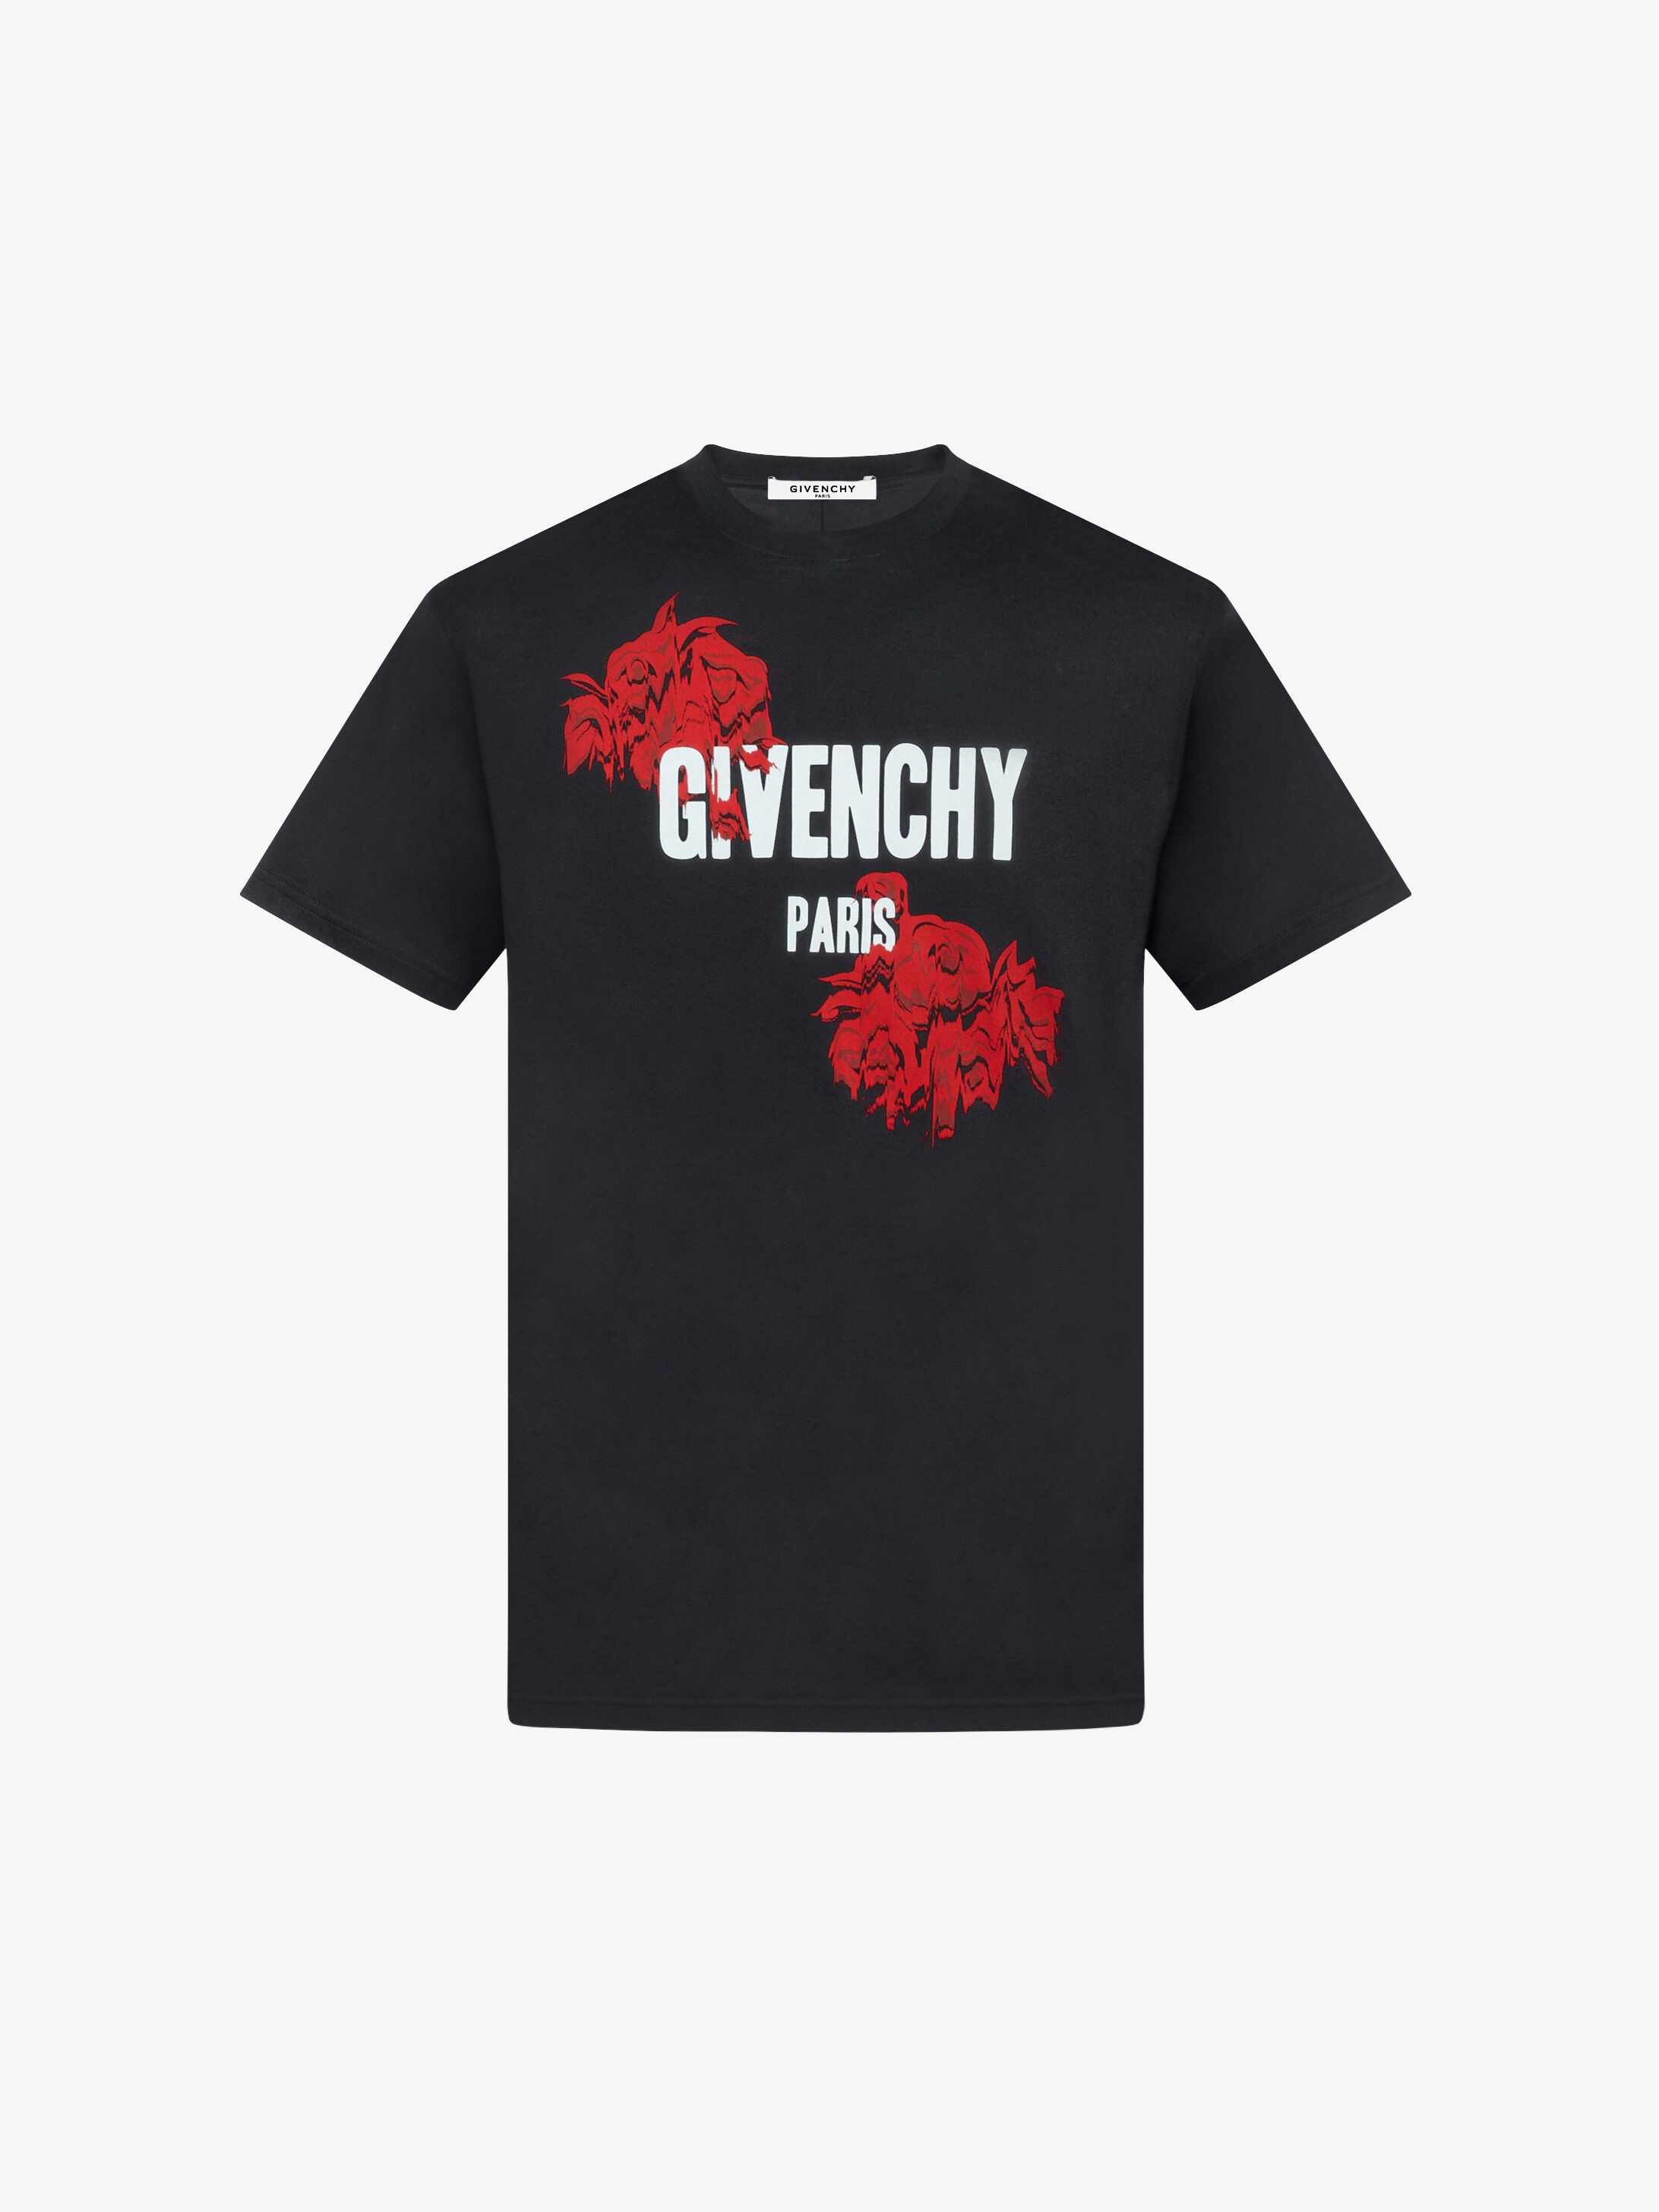 red and white givenchy shirt